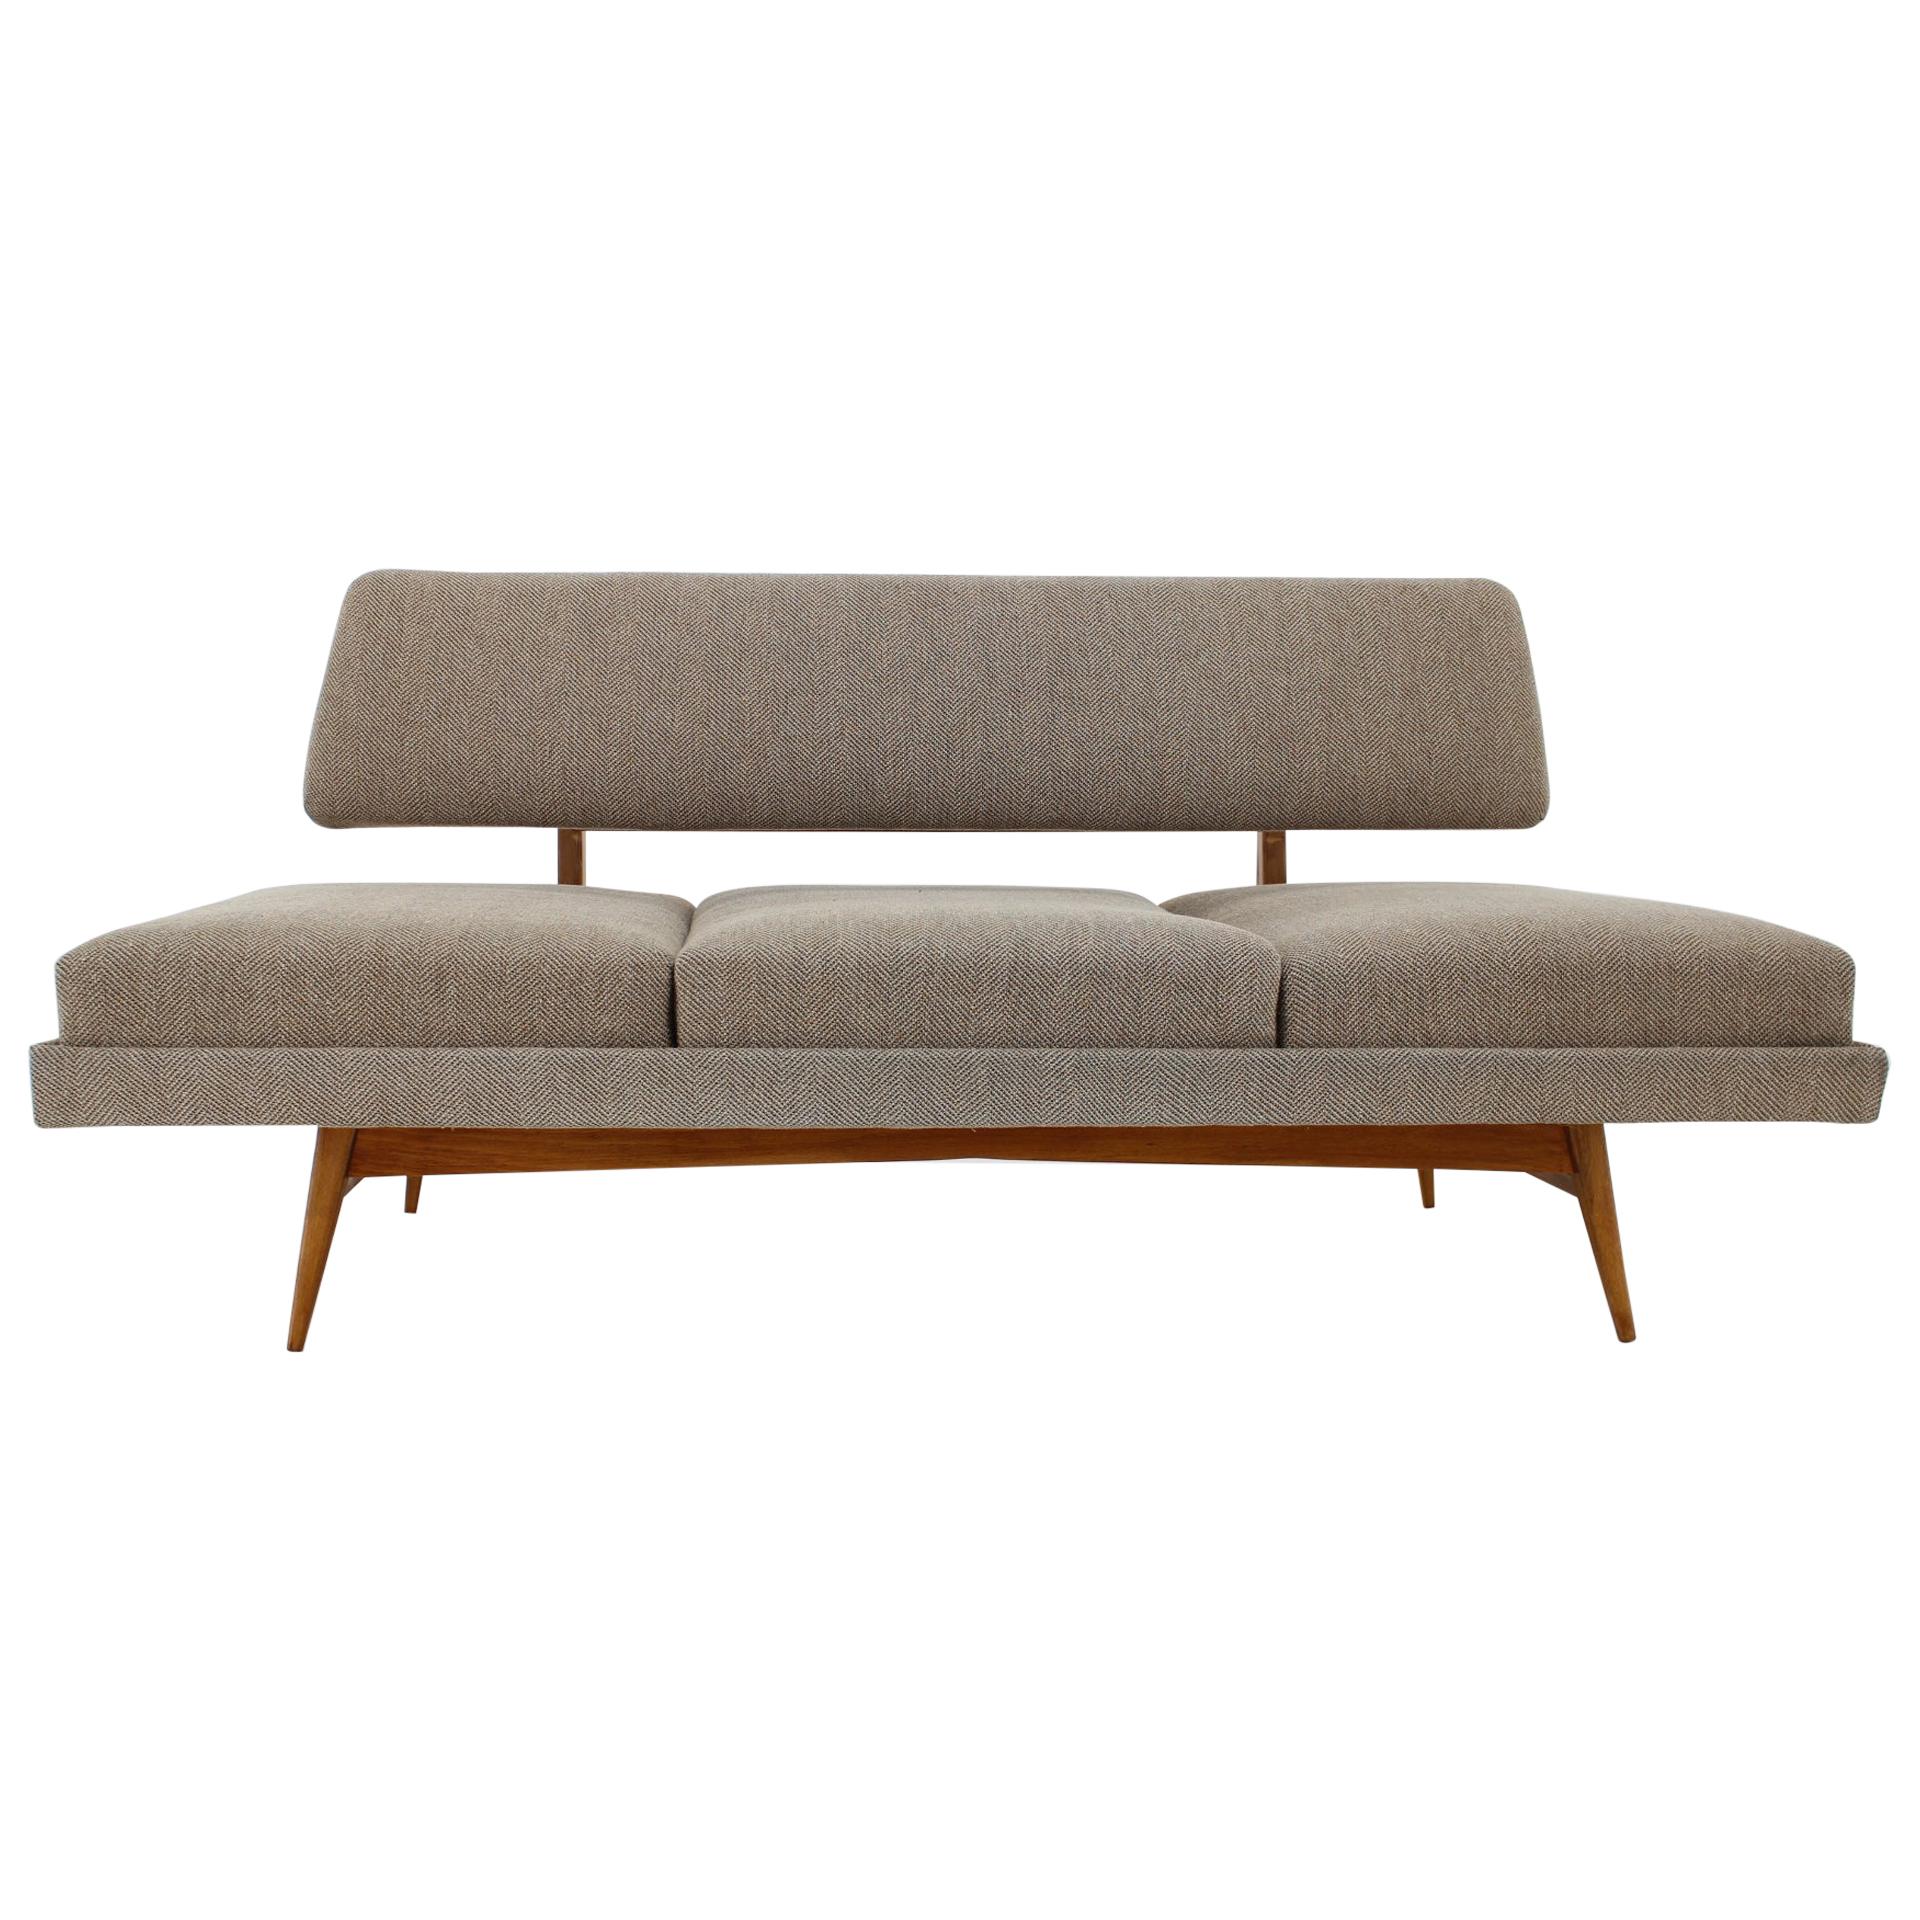 Unique and beautiful adjustable sofa in style of Knoll - around 1960s/